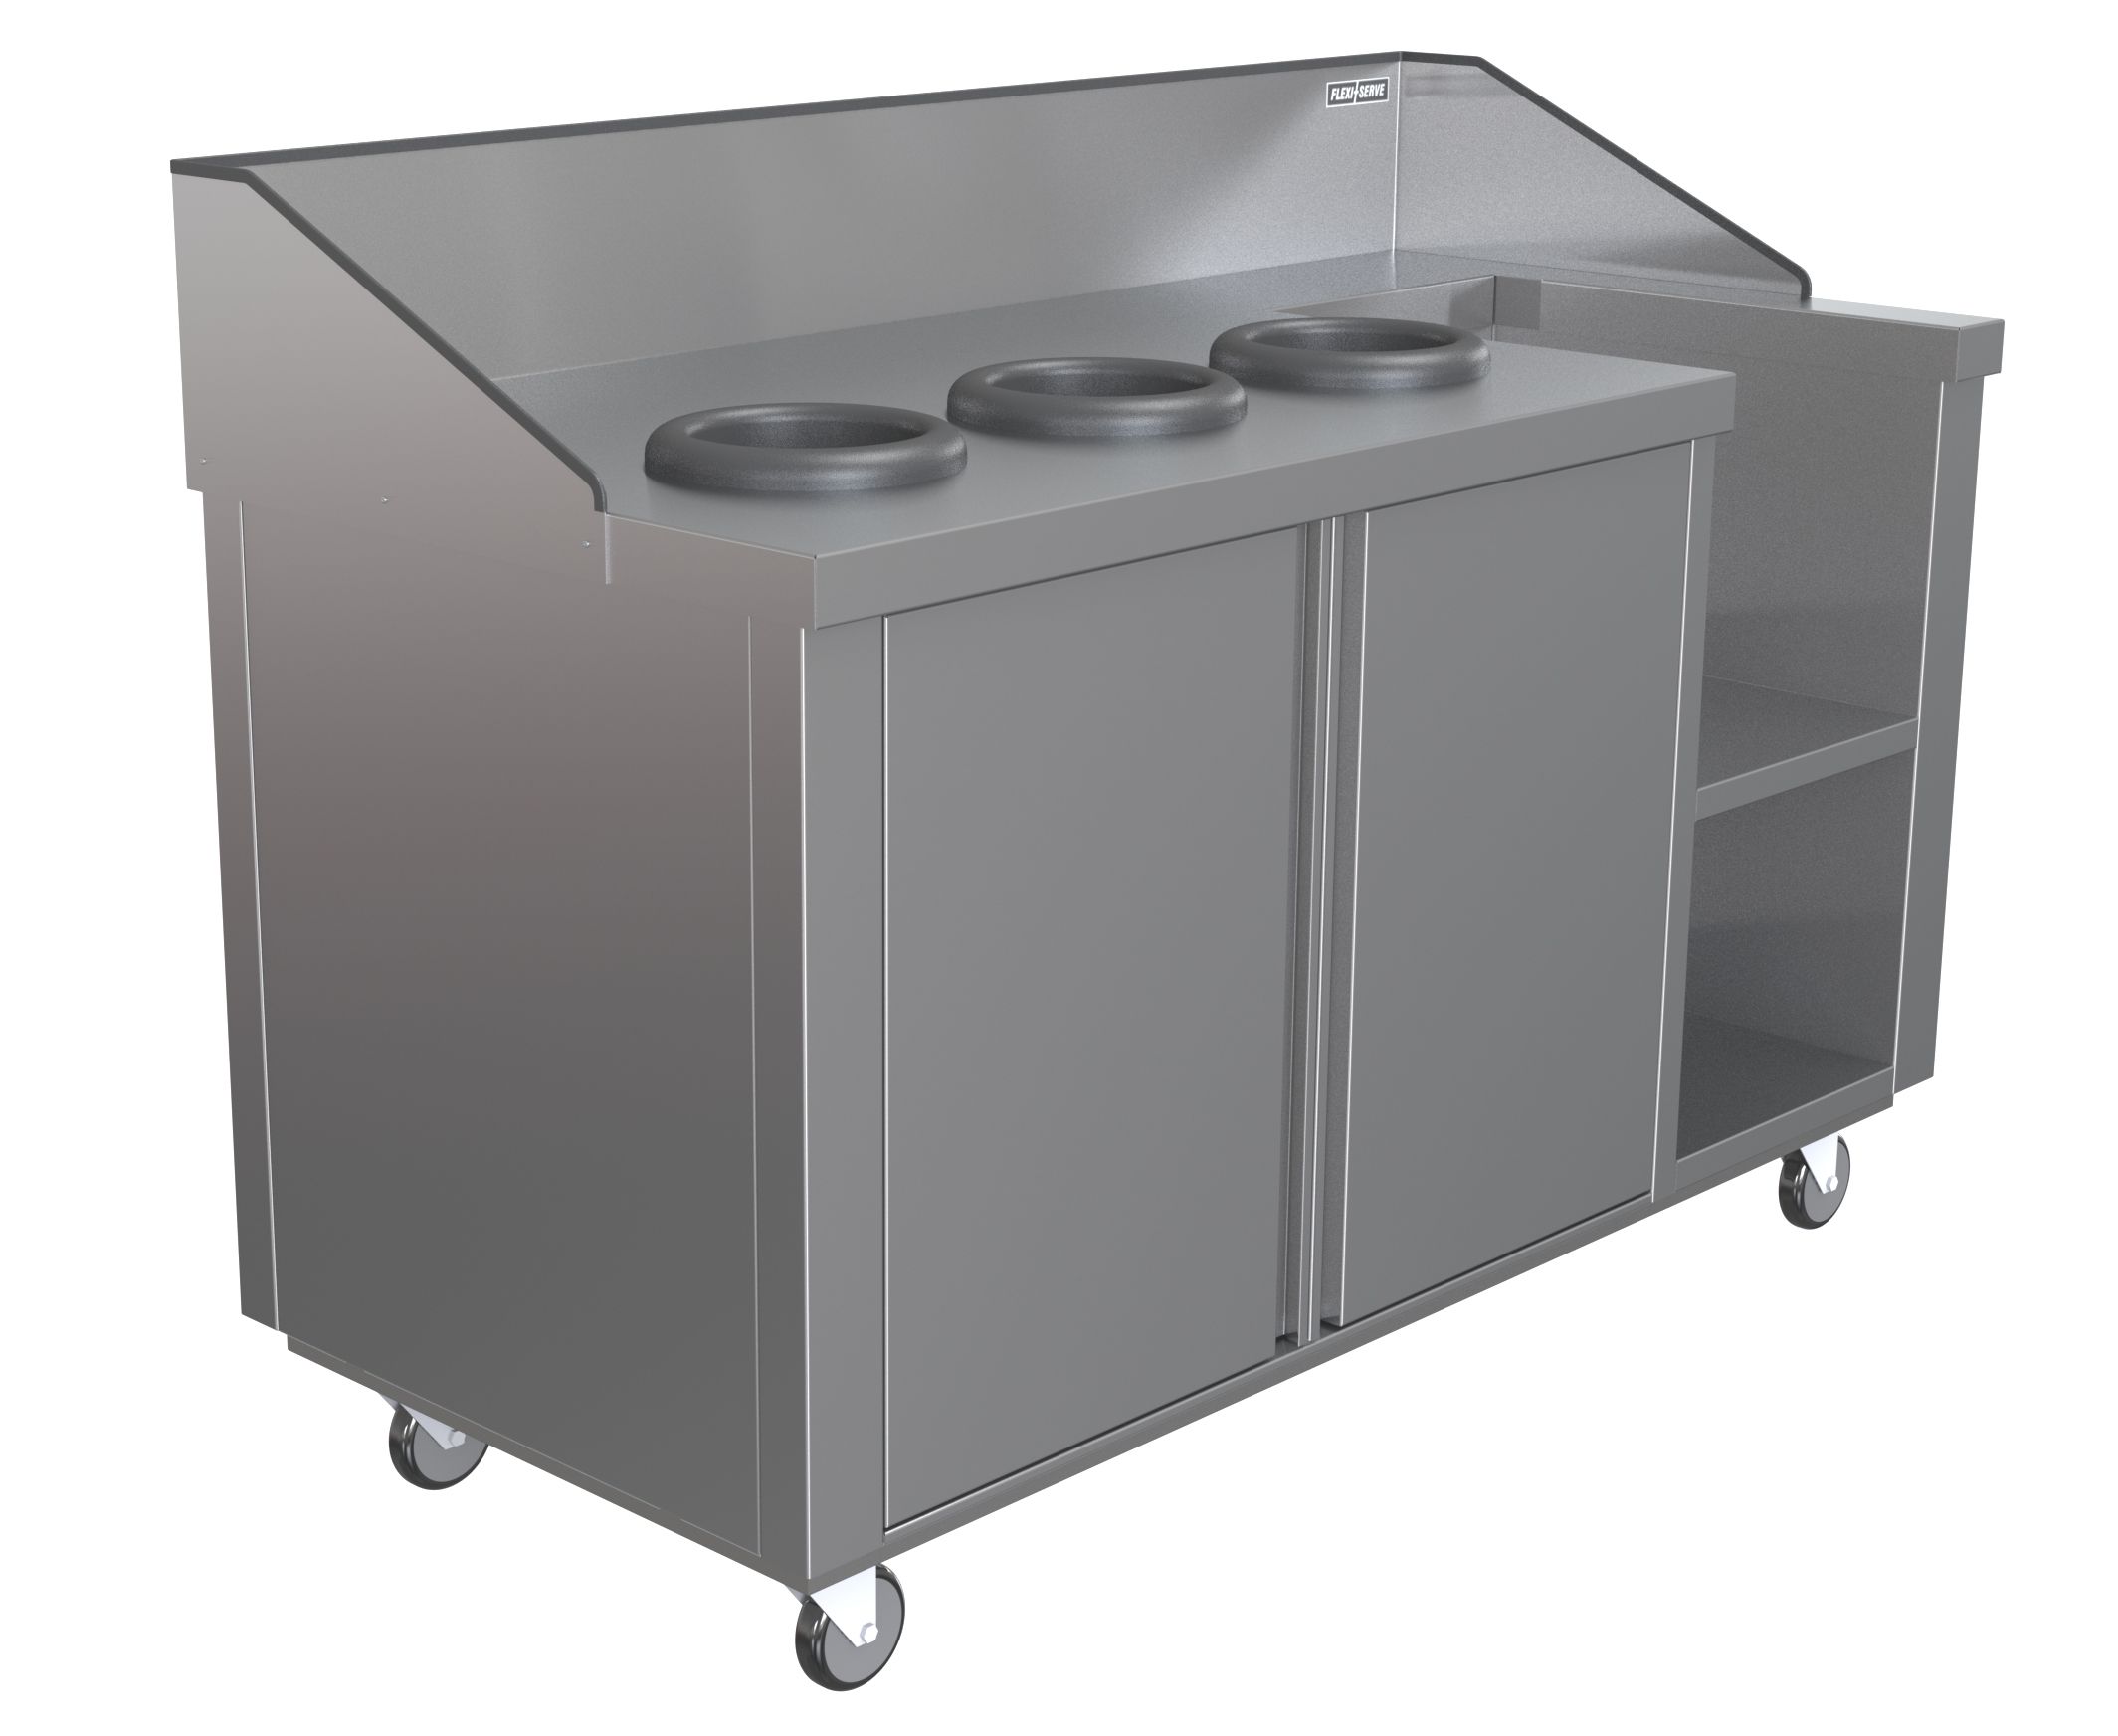 Parry FS-CT Flexi Serve Clearing Trolley